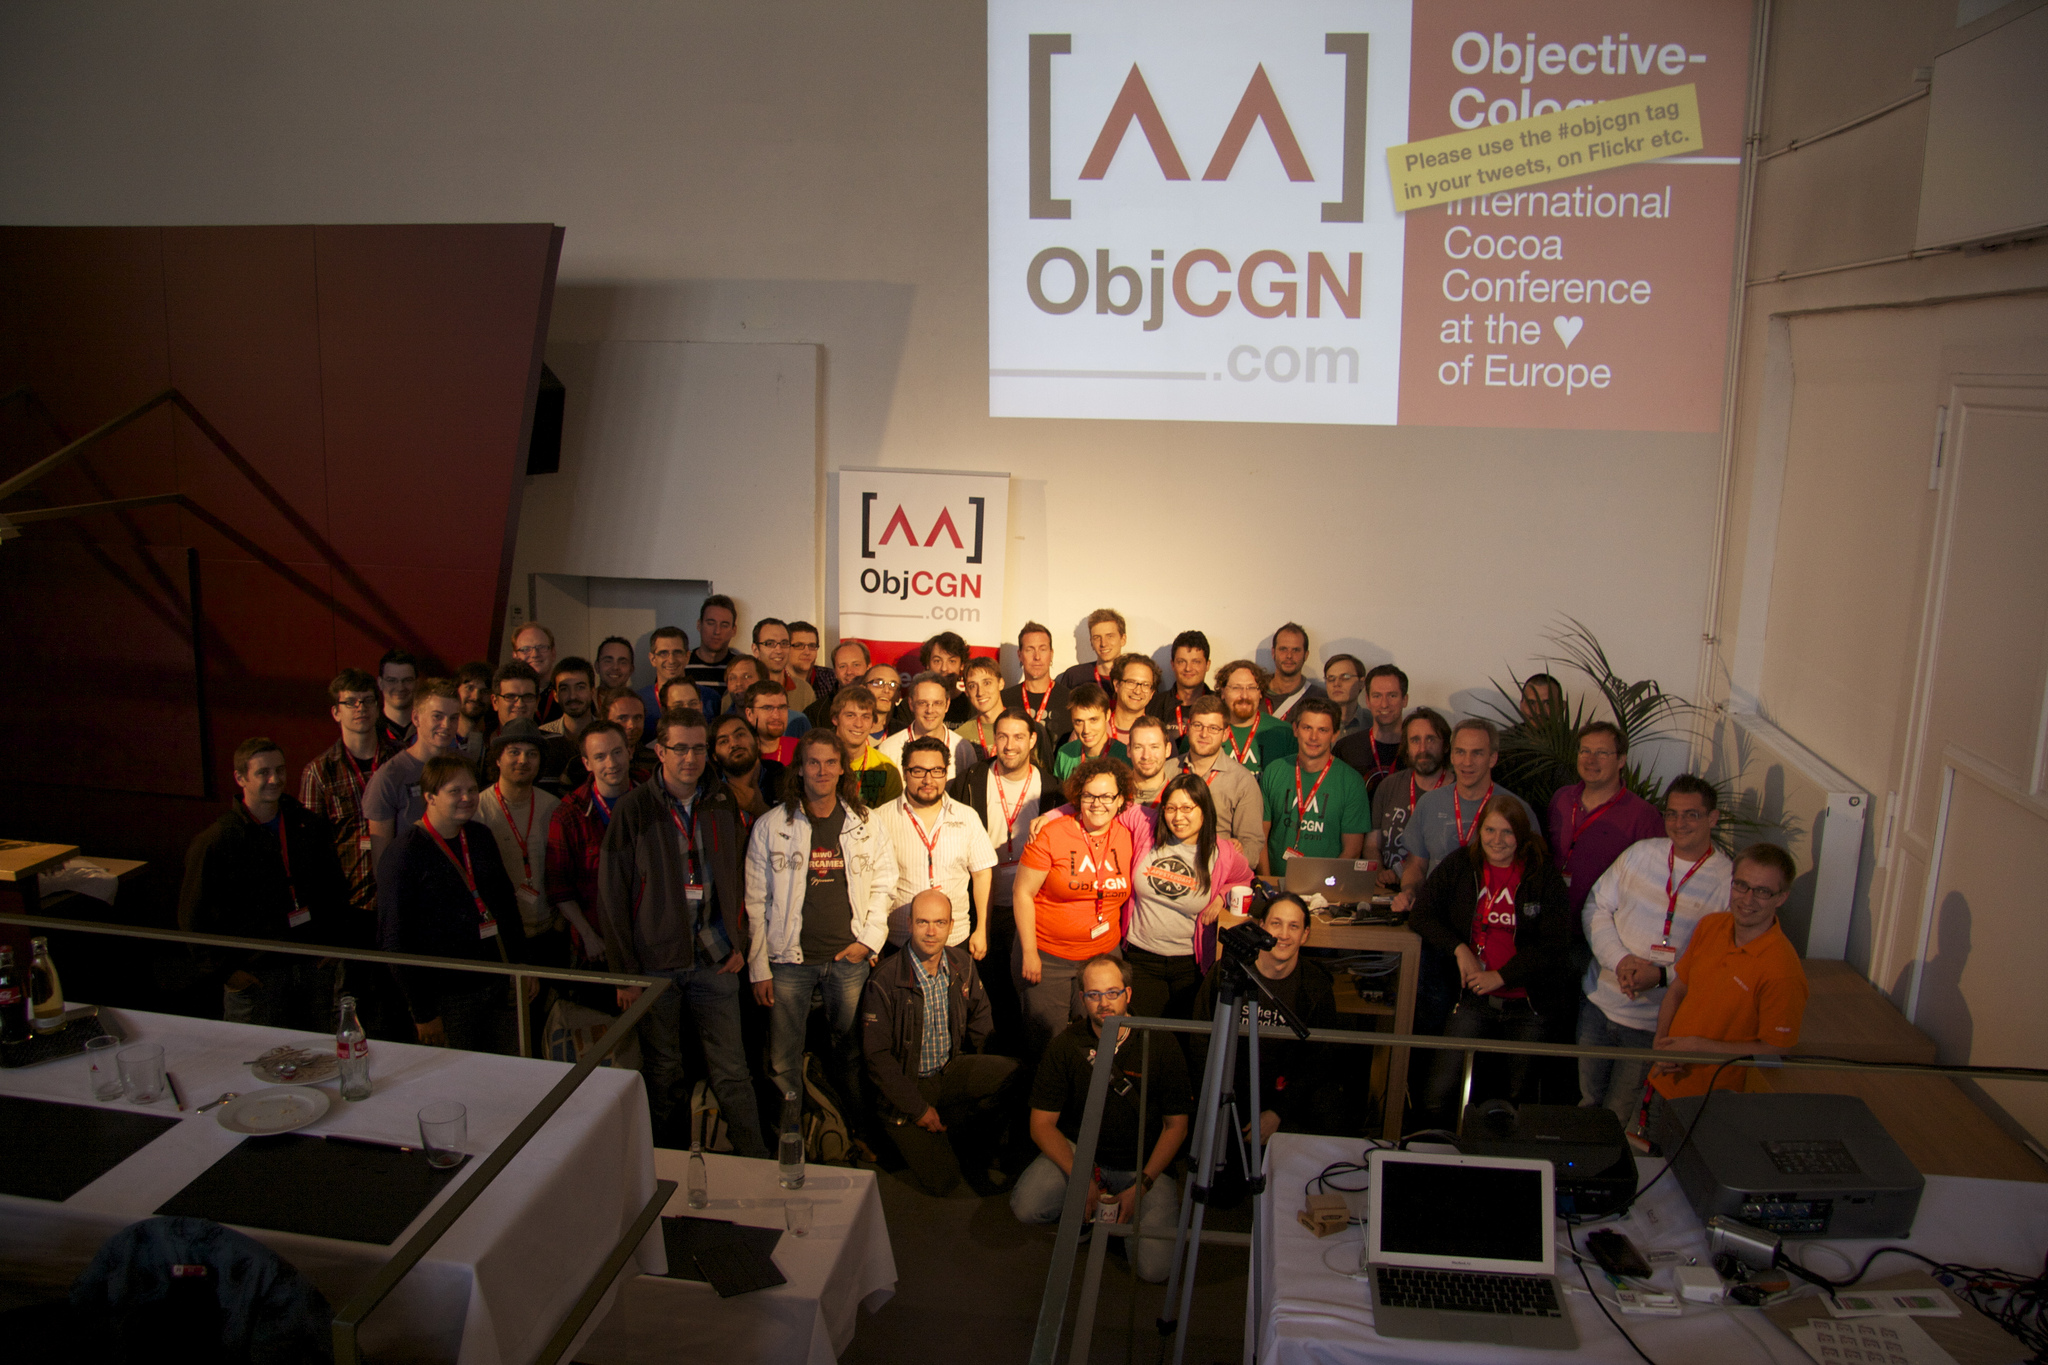 objective-cologne-2013.jpg